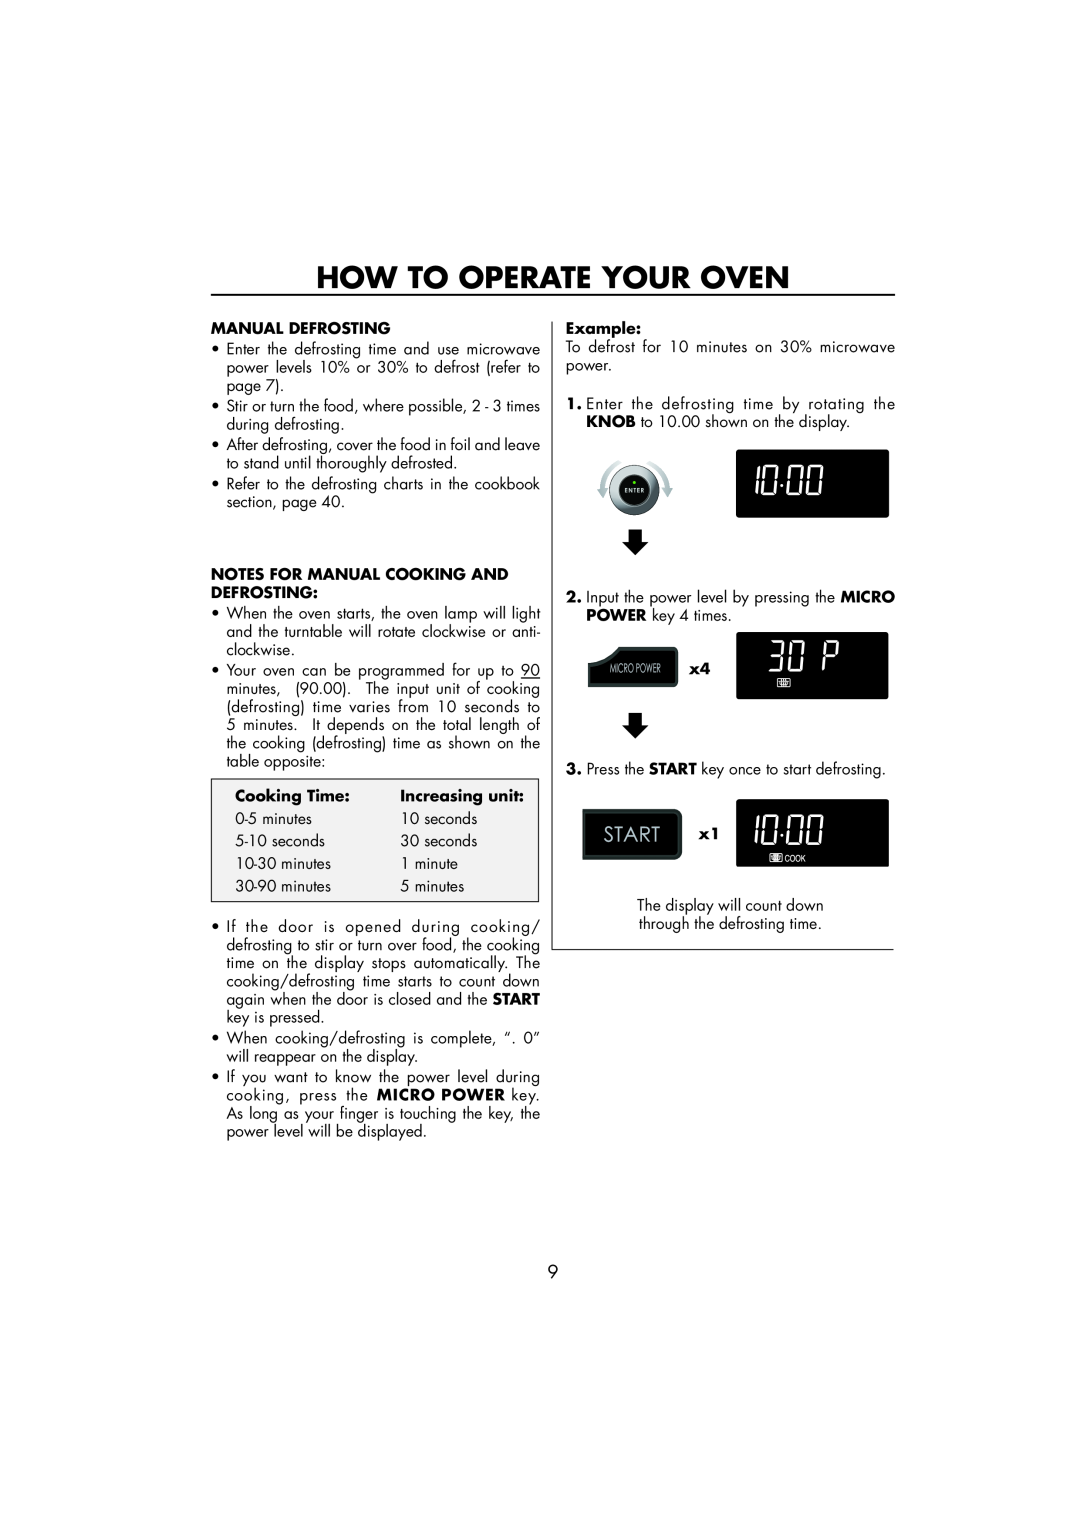 Sharp R-890SLM How To Operate Your Oven, Manual Defrosting, Notes For Manual Cooking And Defrosting, Cooking Time, Example 